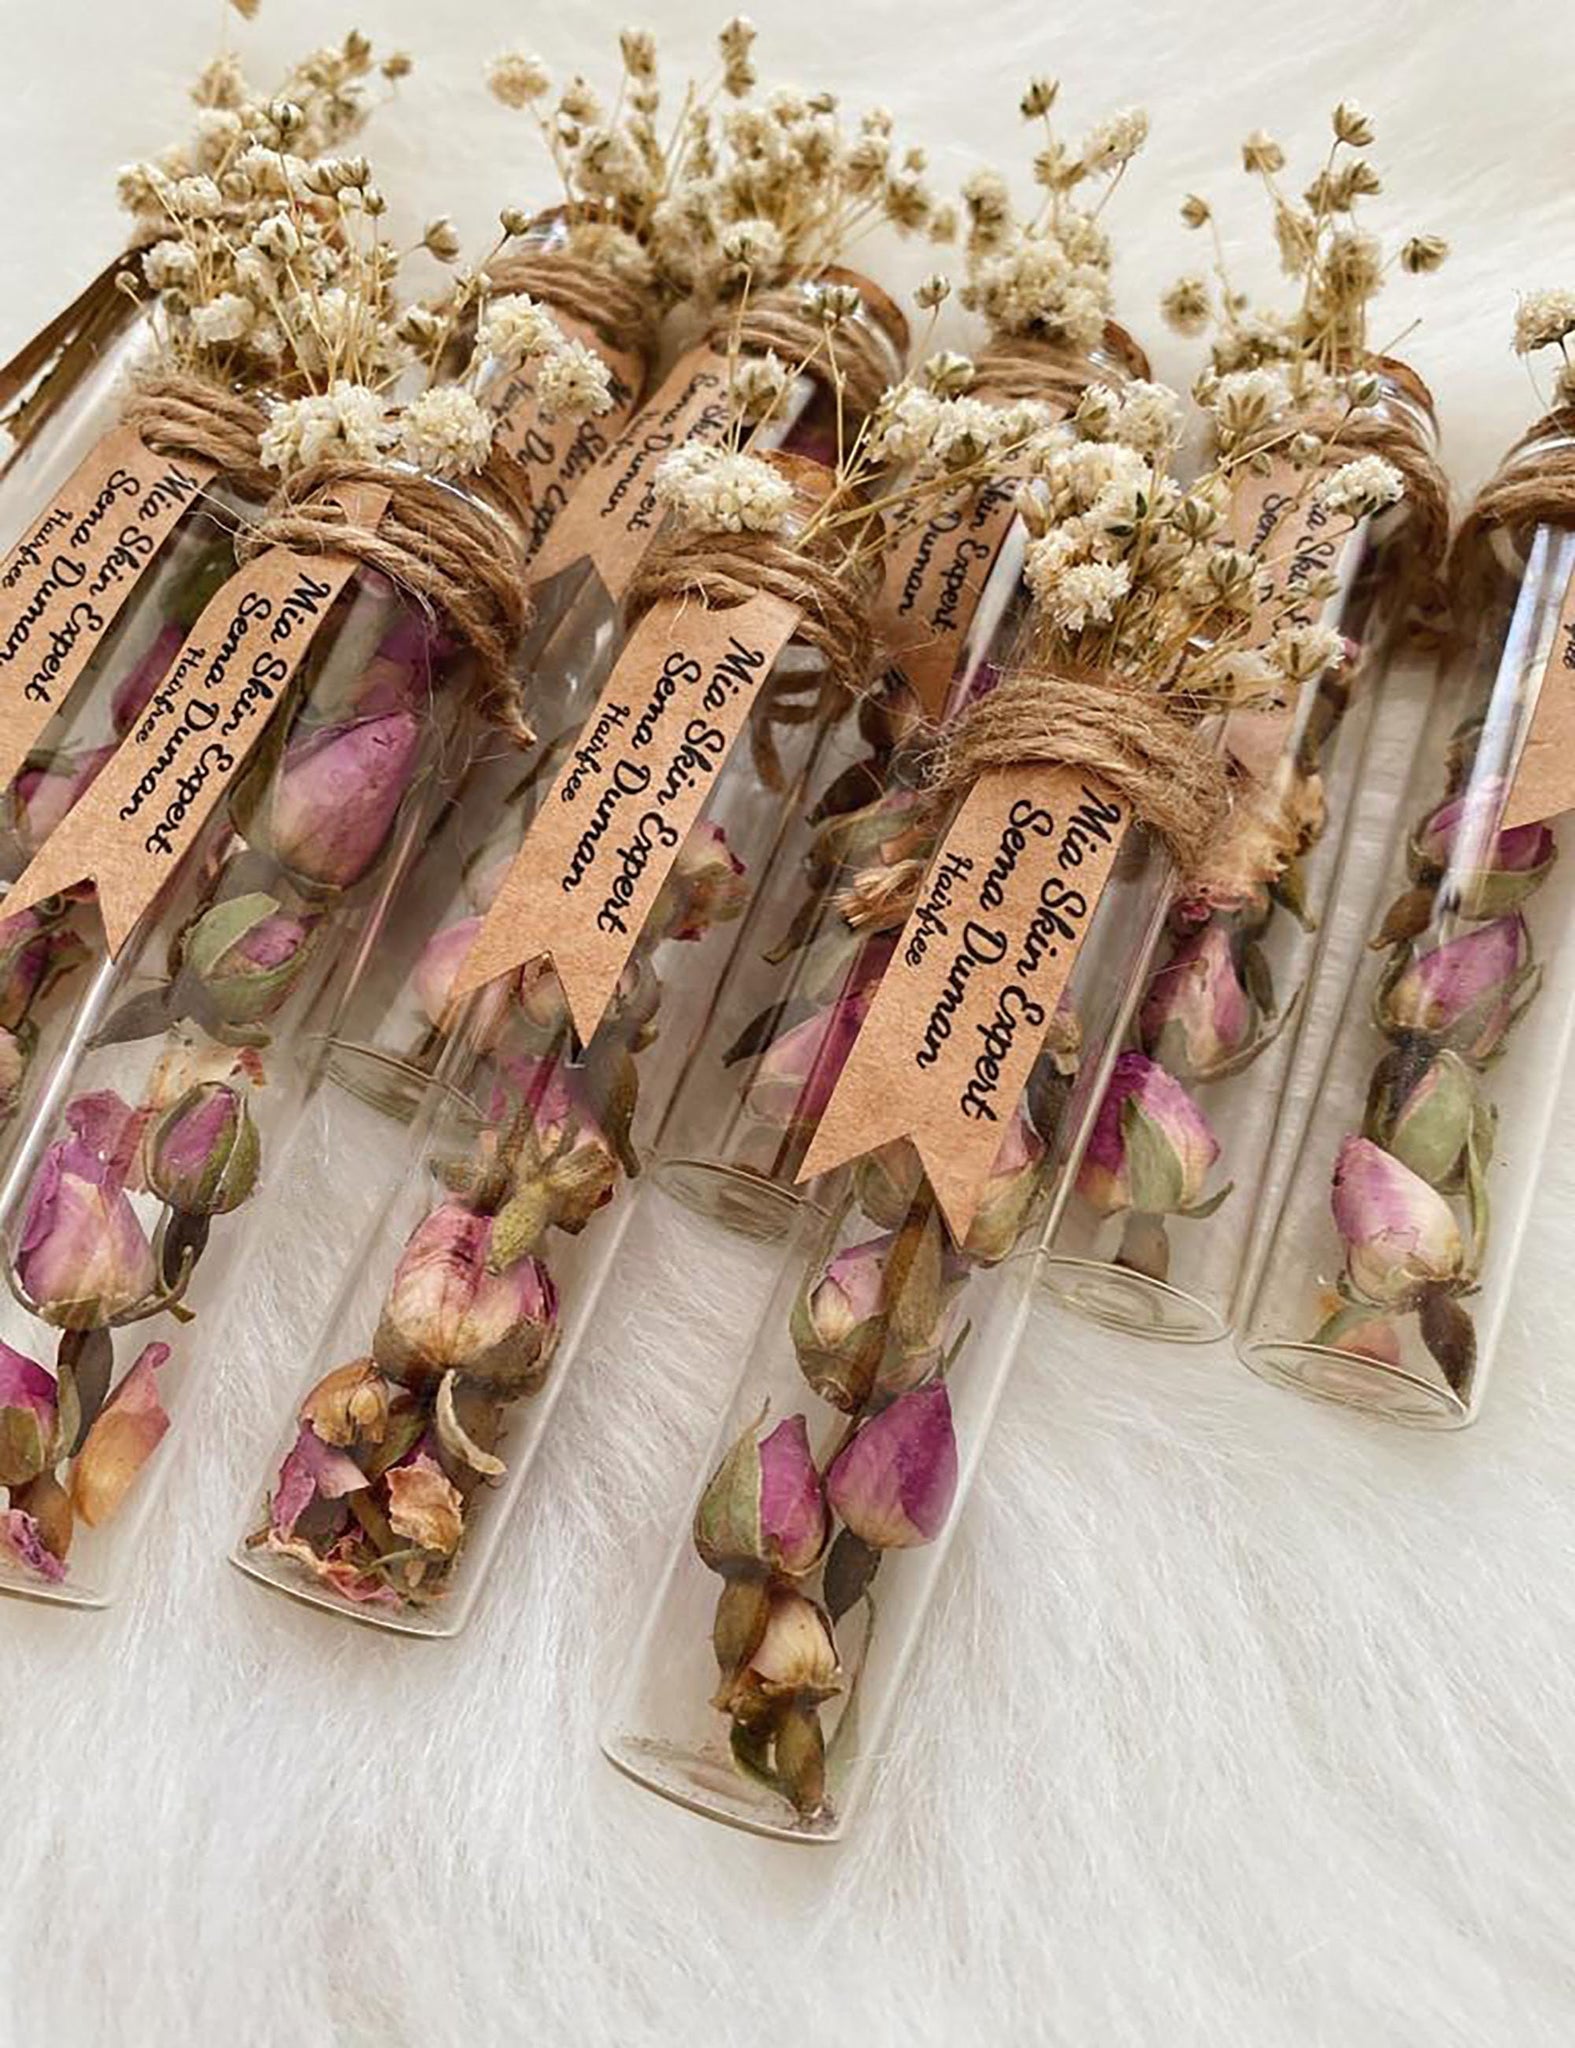 Herbal Tea Favors, Personalized Wedding Tea Favors, Rustic Wedding Favors for Guest, Bulk Party Gifts, Thank You Gifts, Tea Tube Gift